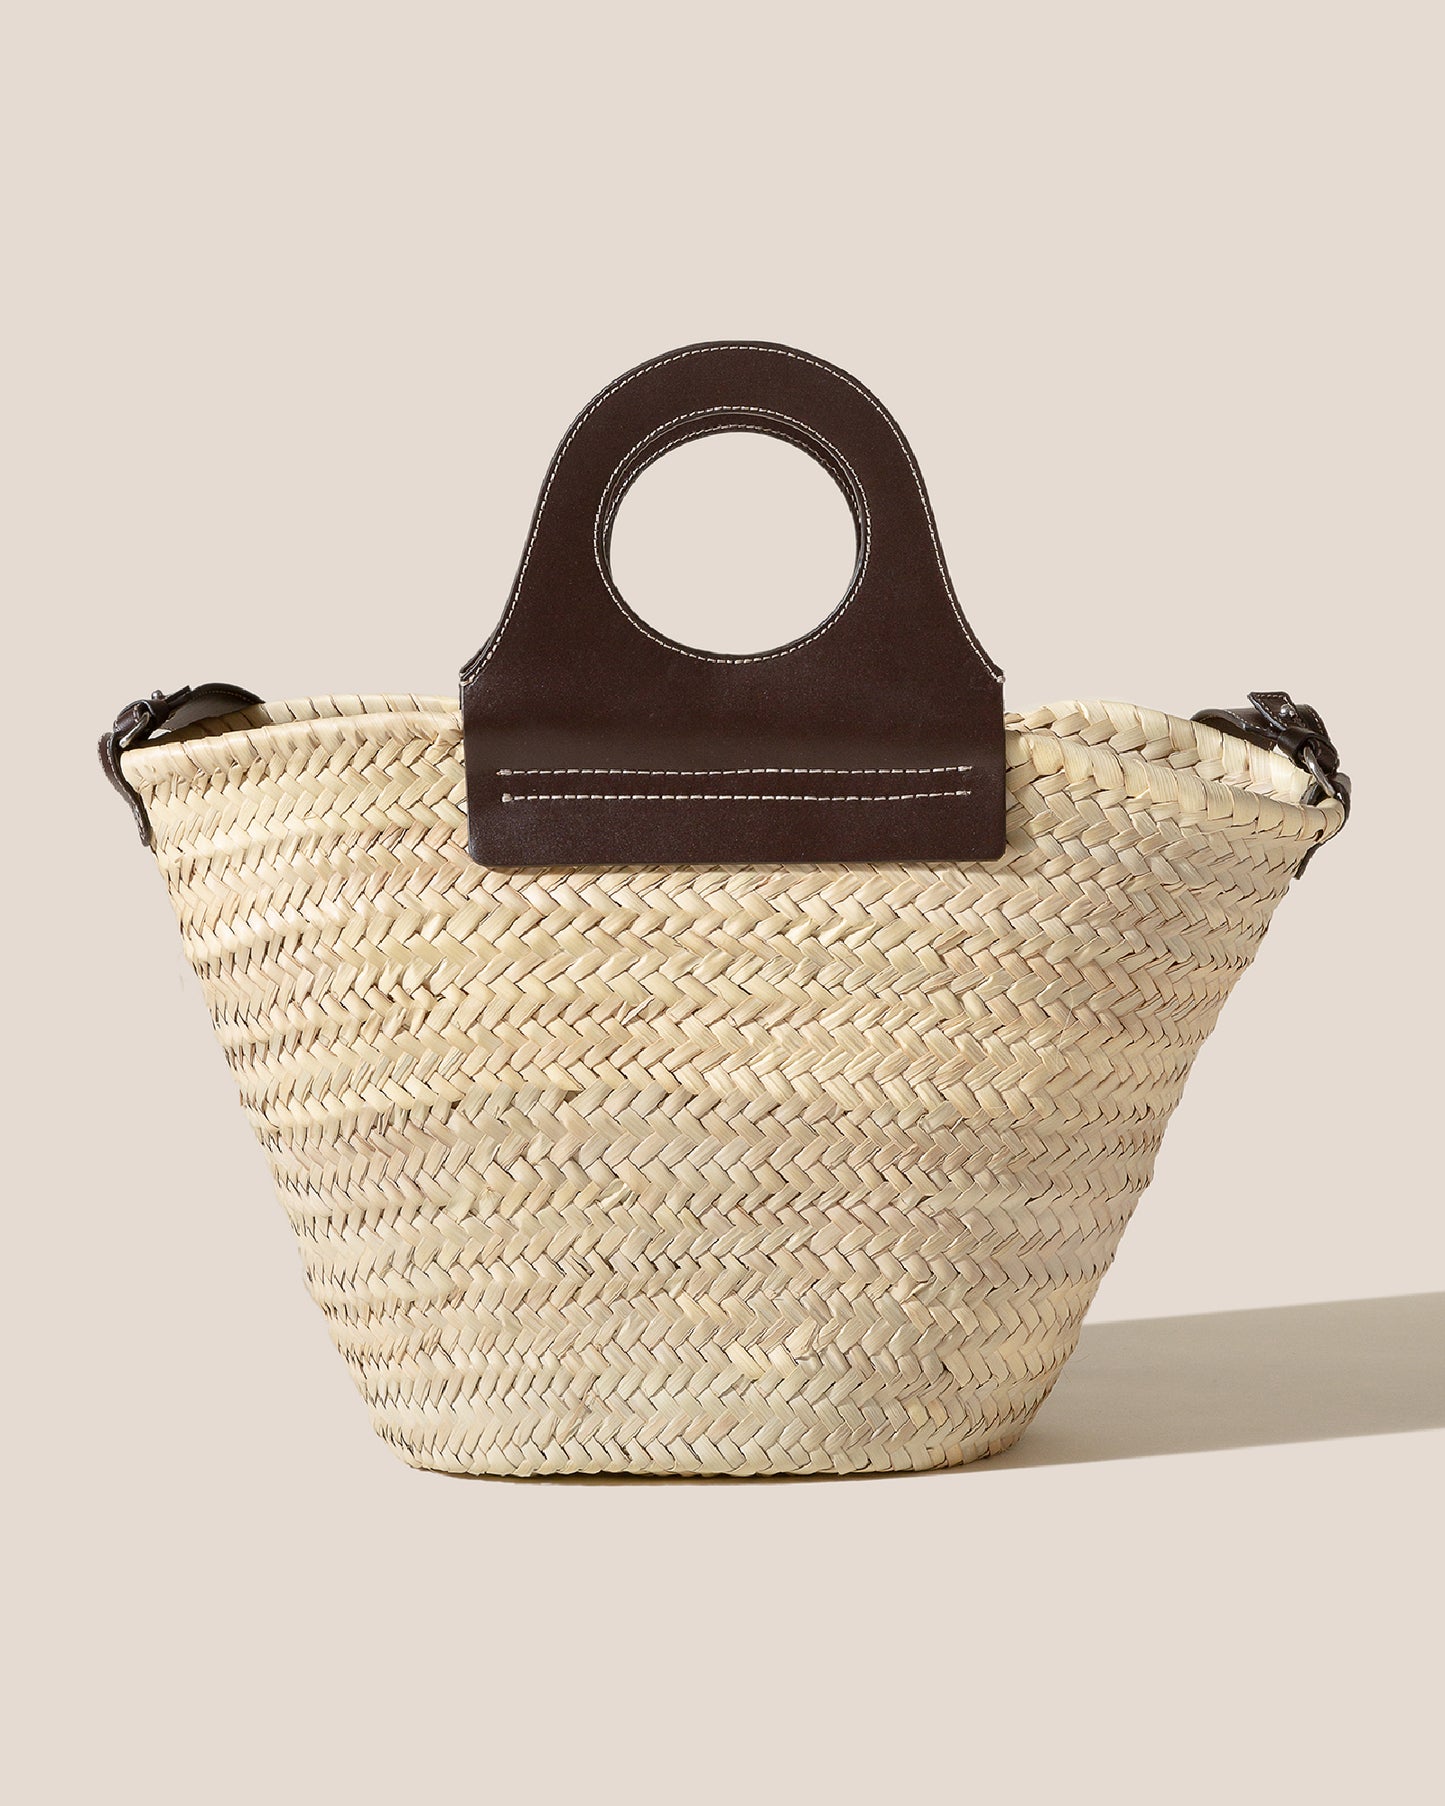 CABAS - Handwoven Straw Tote Bag